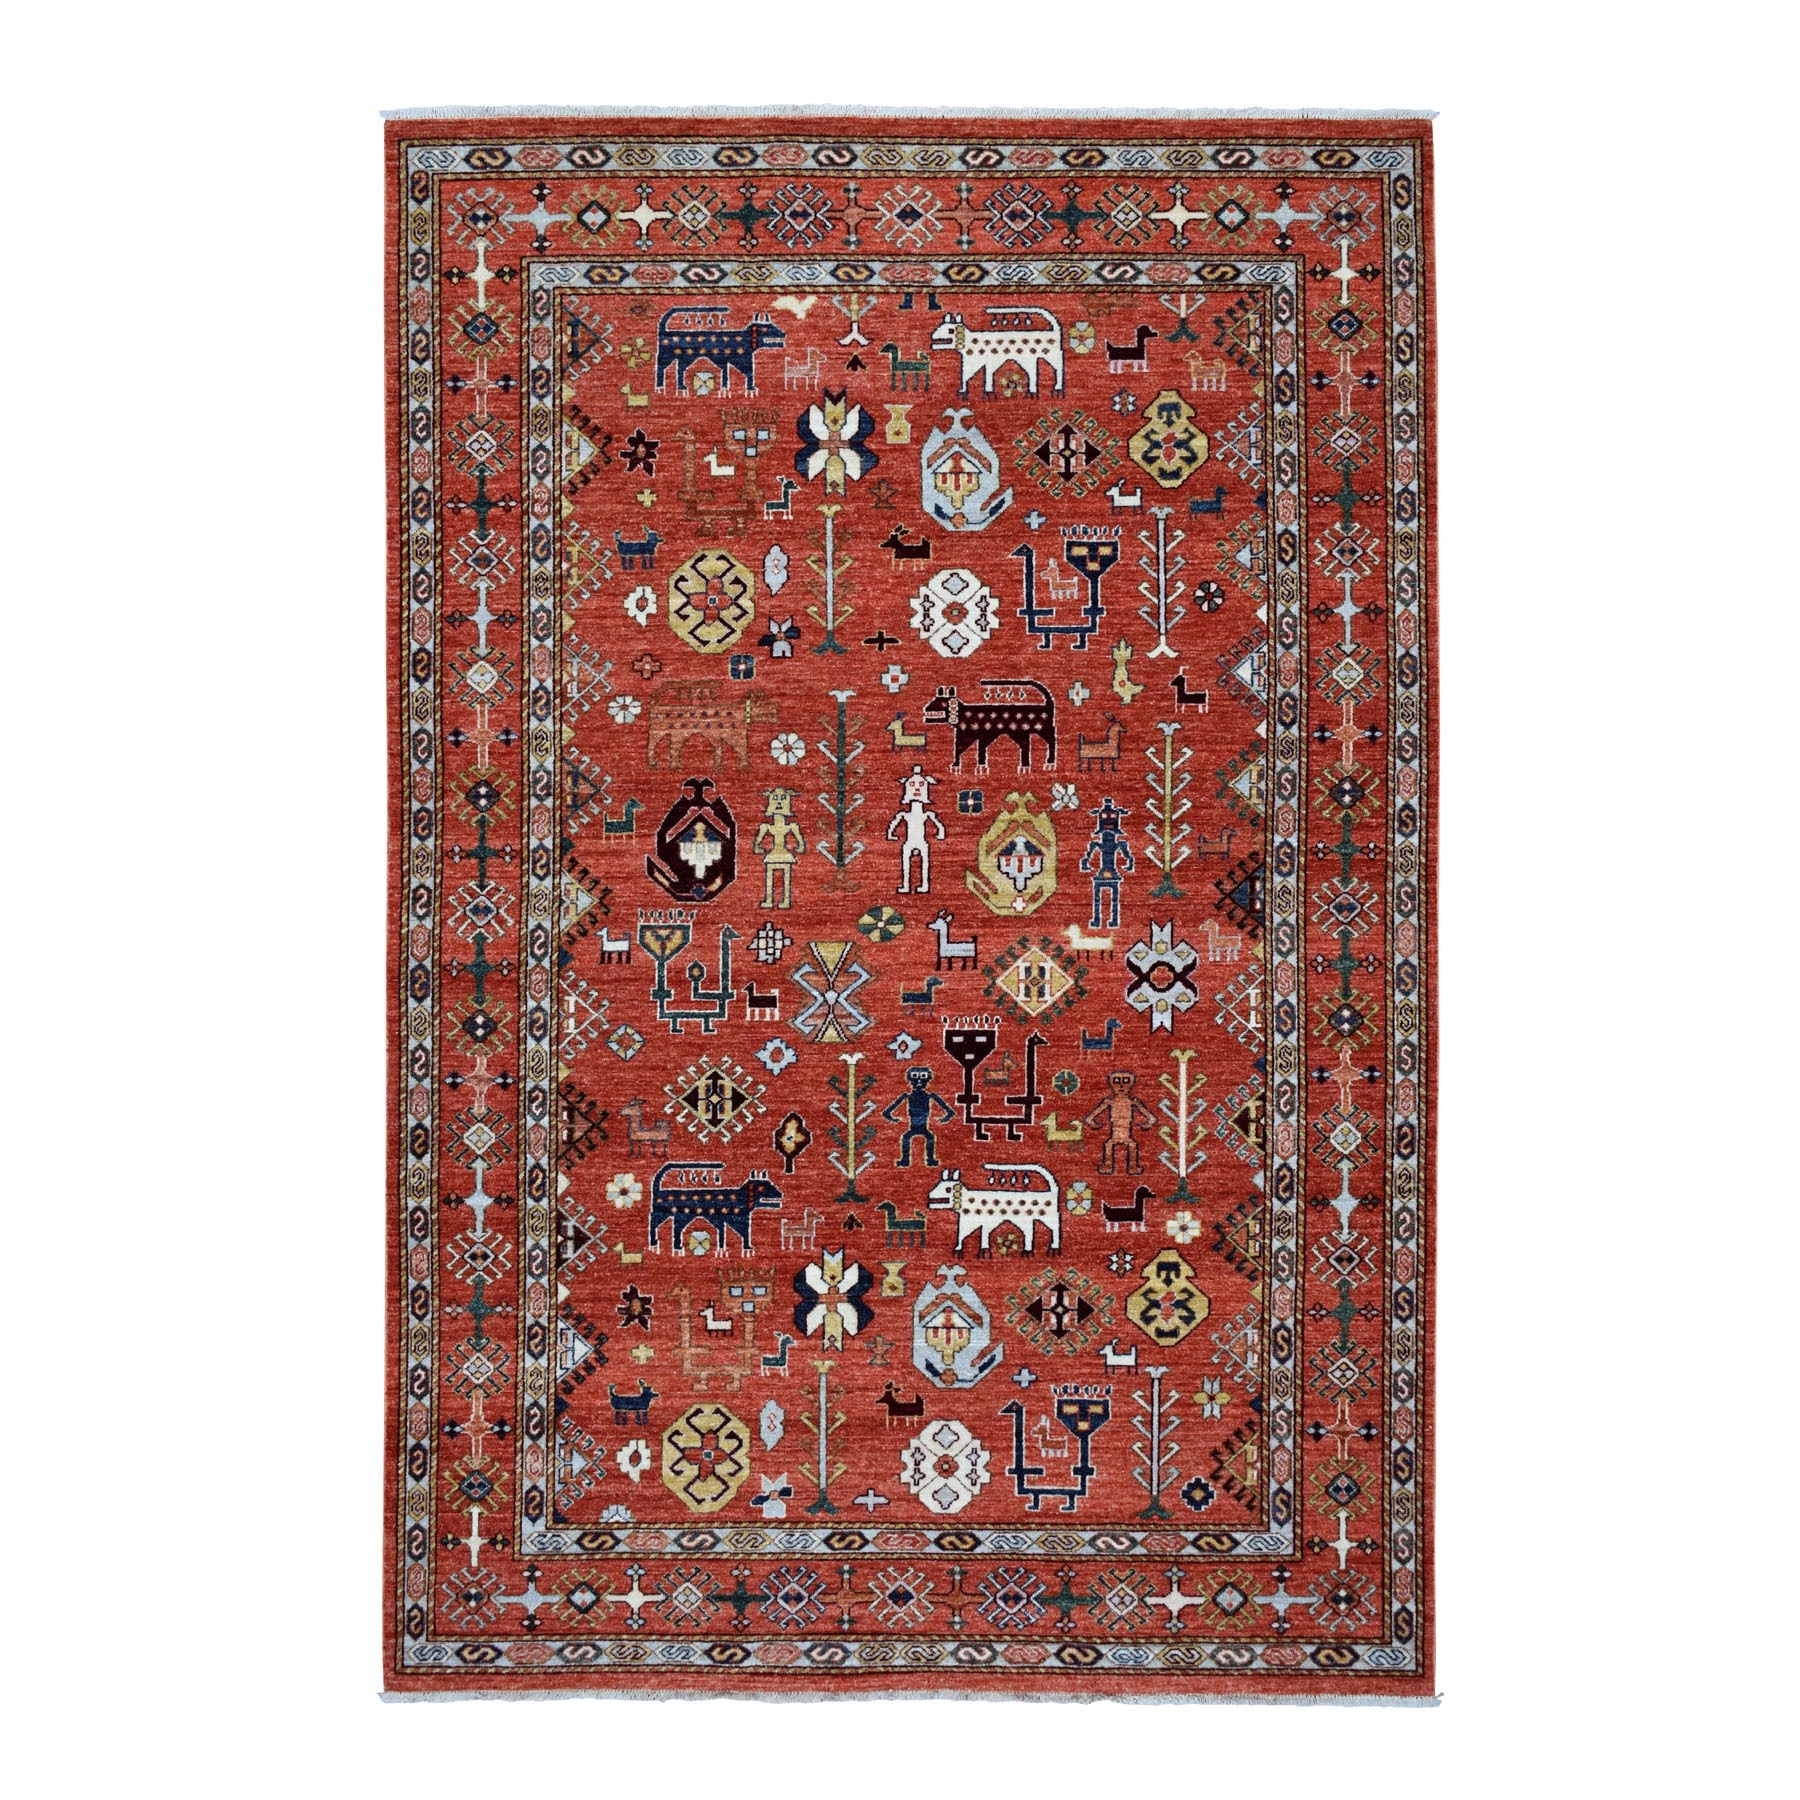 6'2"X9'1" Red Afghan Turkoman Ersari Pictorial Design Pure Wool Hand Knotted Oriental Rug moaecac7